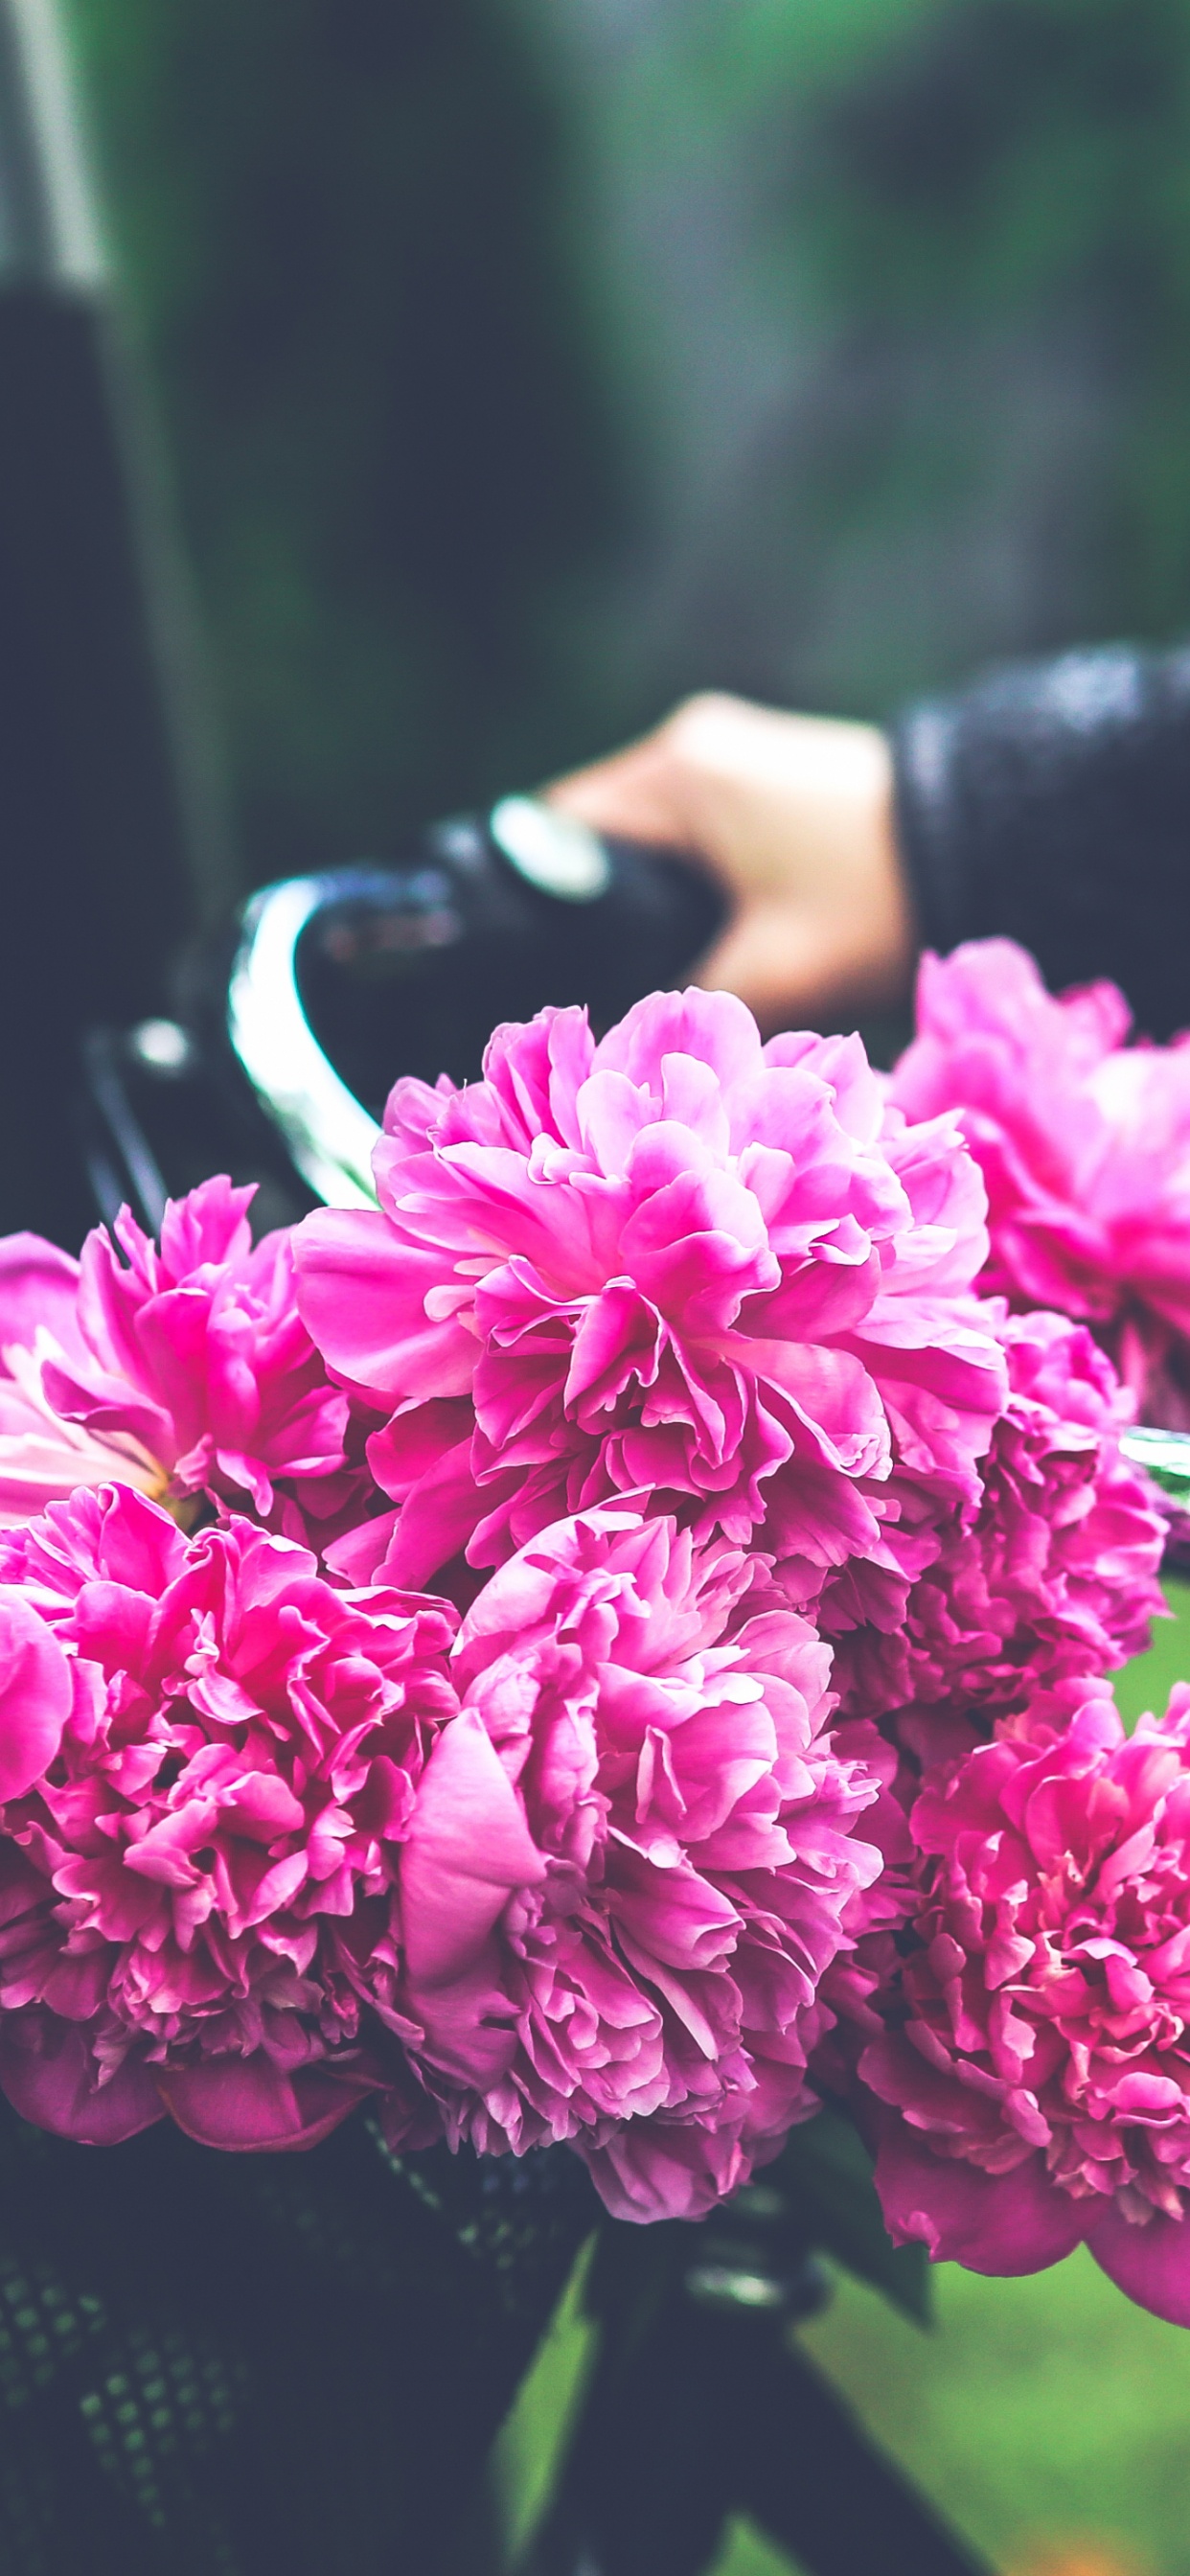 Person Holding Pink Flowers During Daytime. Wallpaper in 1242x2688 Resolution